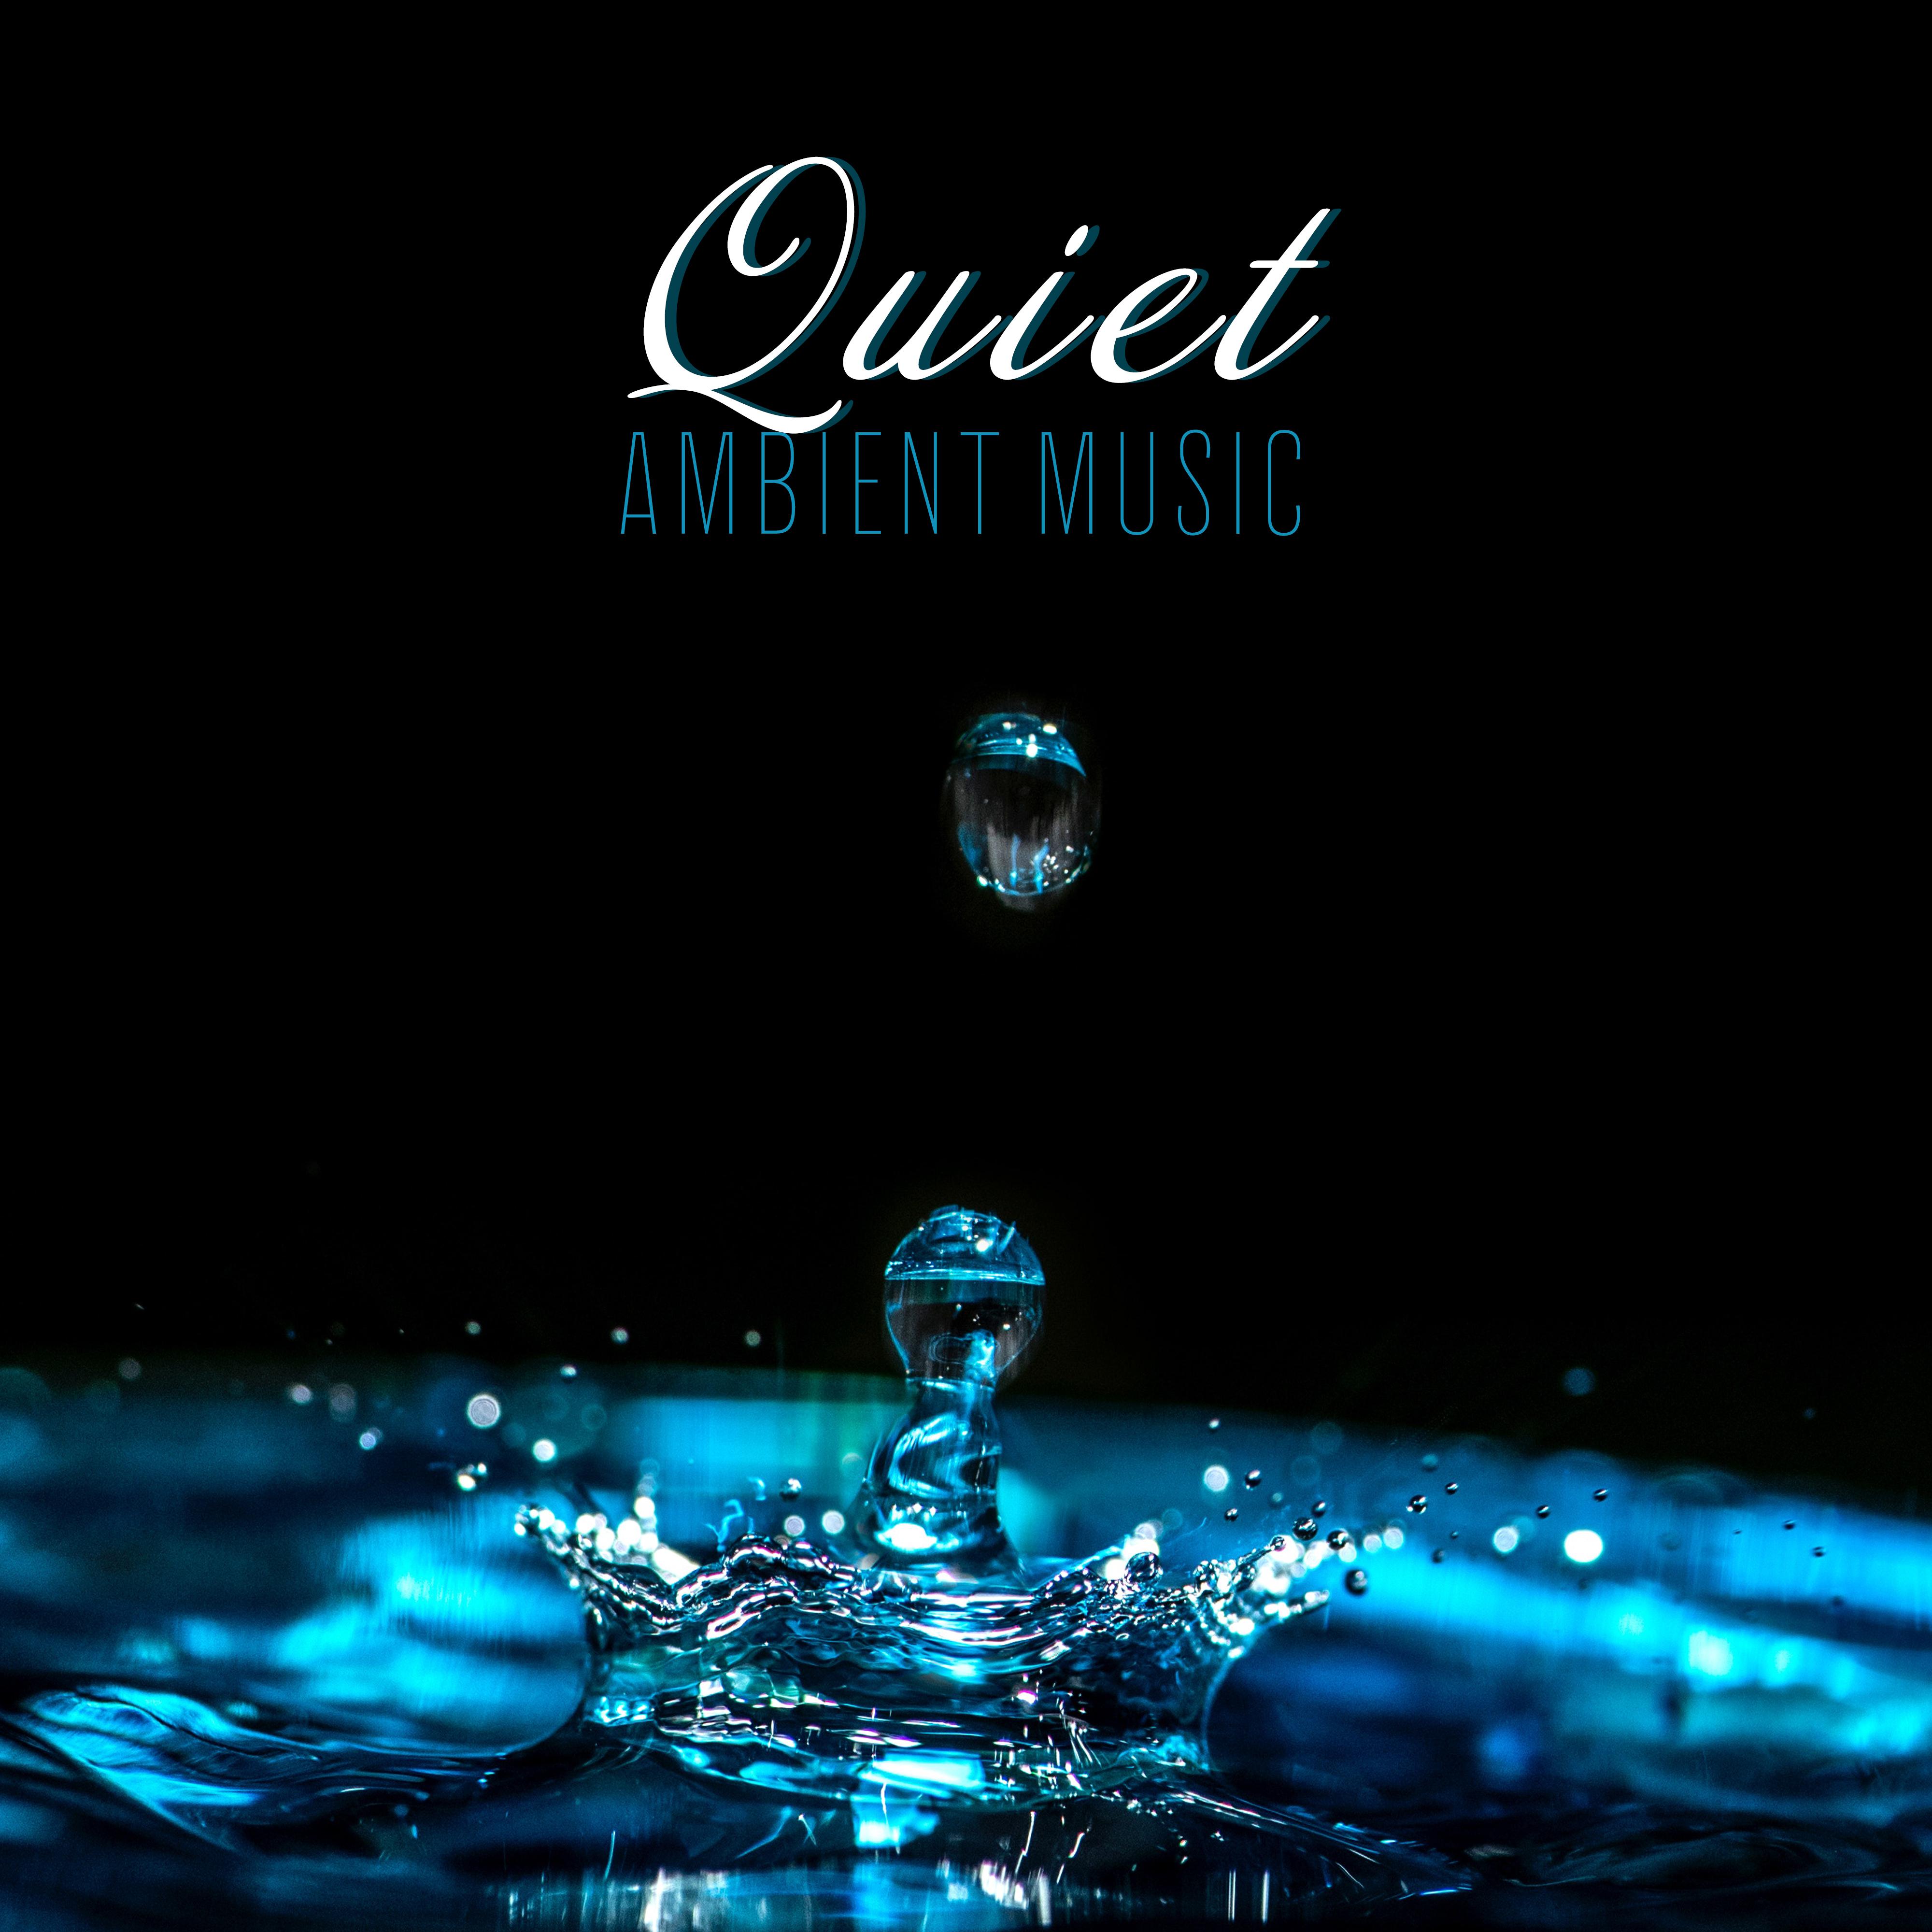 Quiet Ambient Music: Calm, Gentle and Quiet Ambient Compositions with the Sounds of Nature, Birds Singing and the Sound of Water